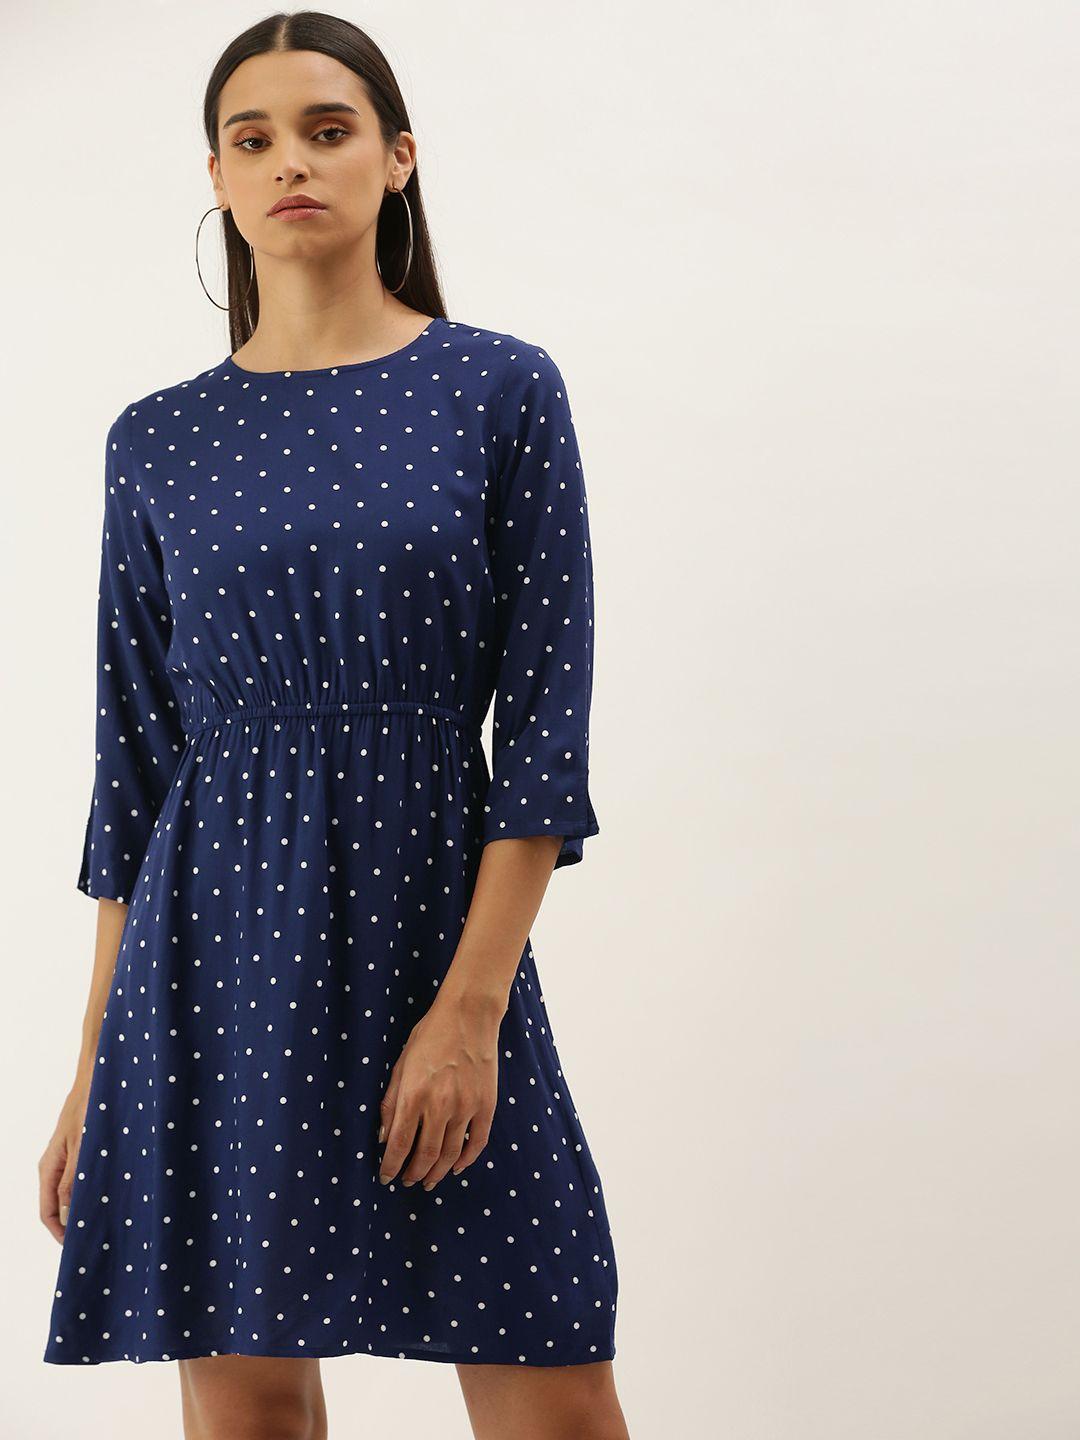 flying machine navy blue & white polka dots print fit and flare dress